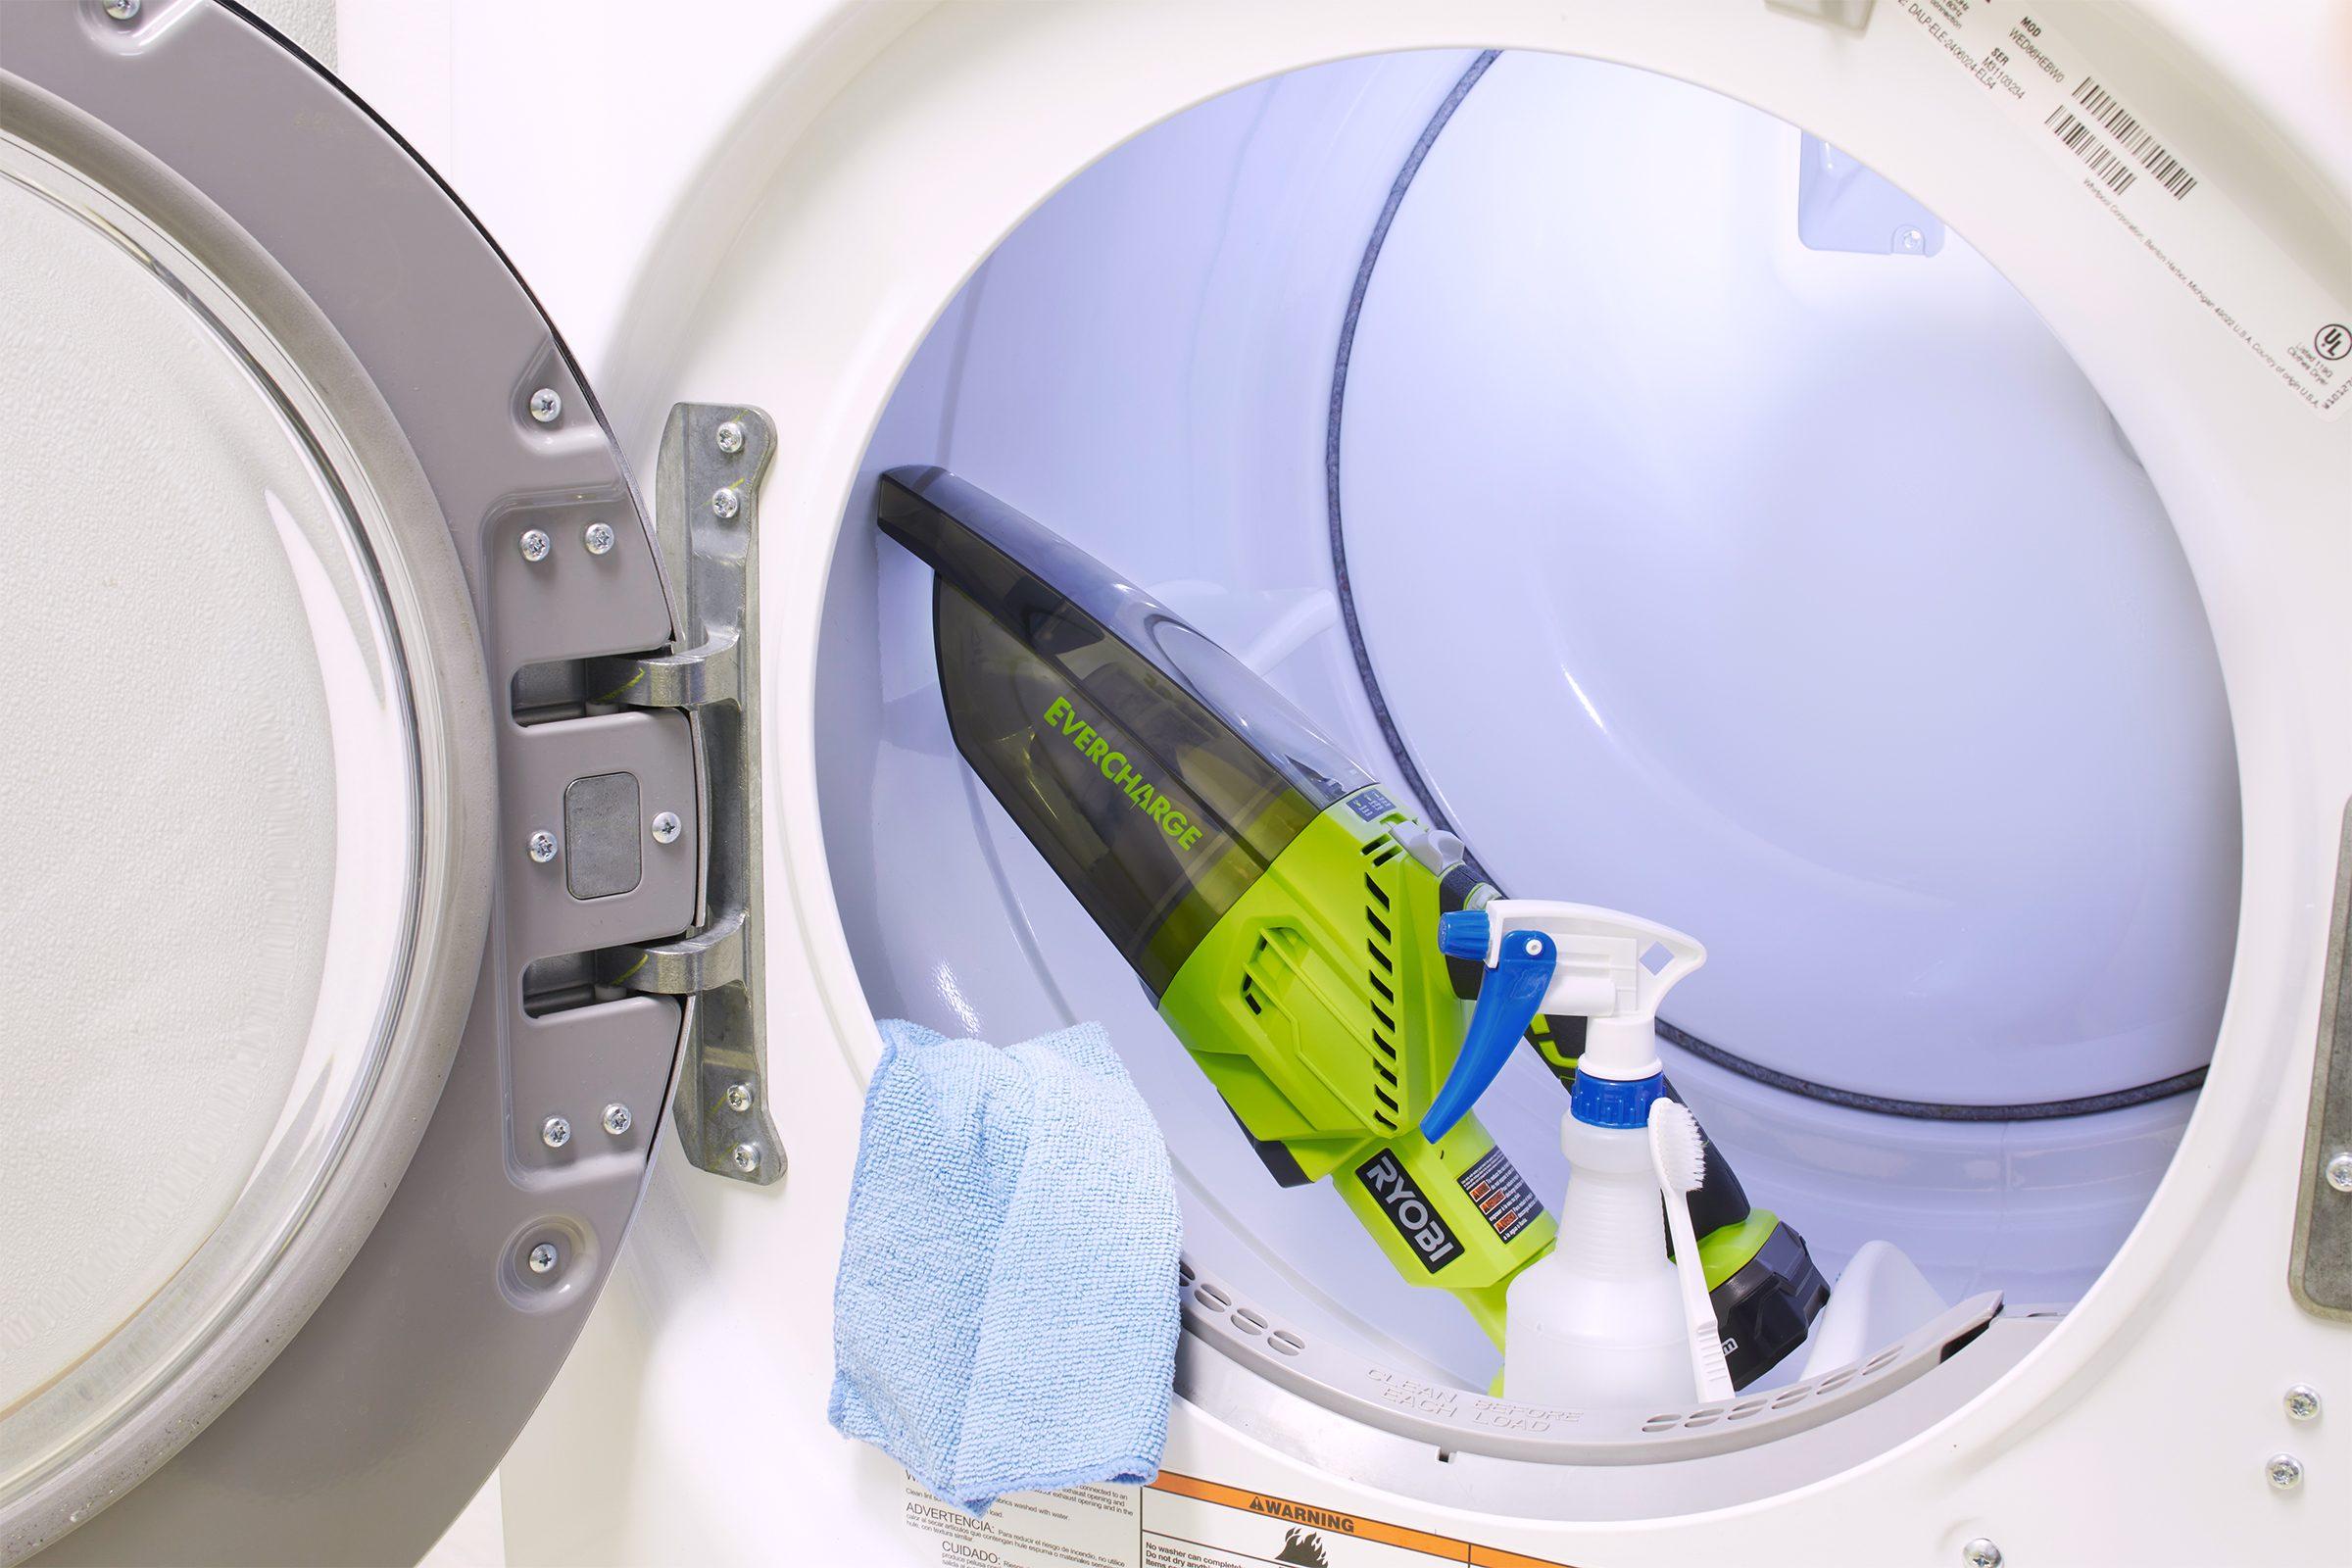 https://www.rd.com/wp-content/uploads/2021/12/how-to-clean-a-dryer_RDigital_HubCleaning_dryer_003.jpg